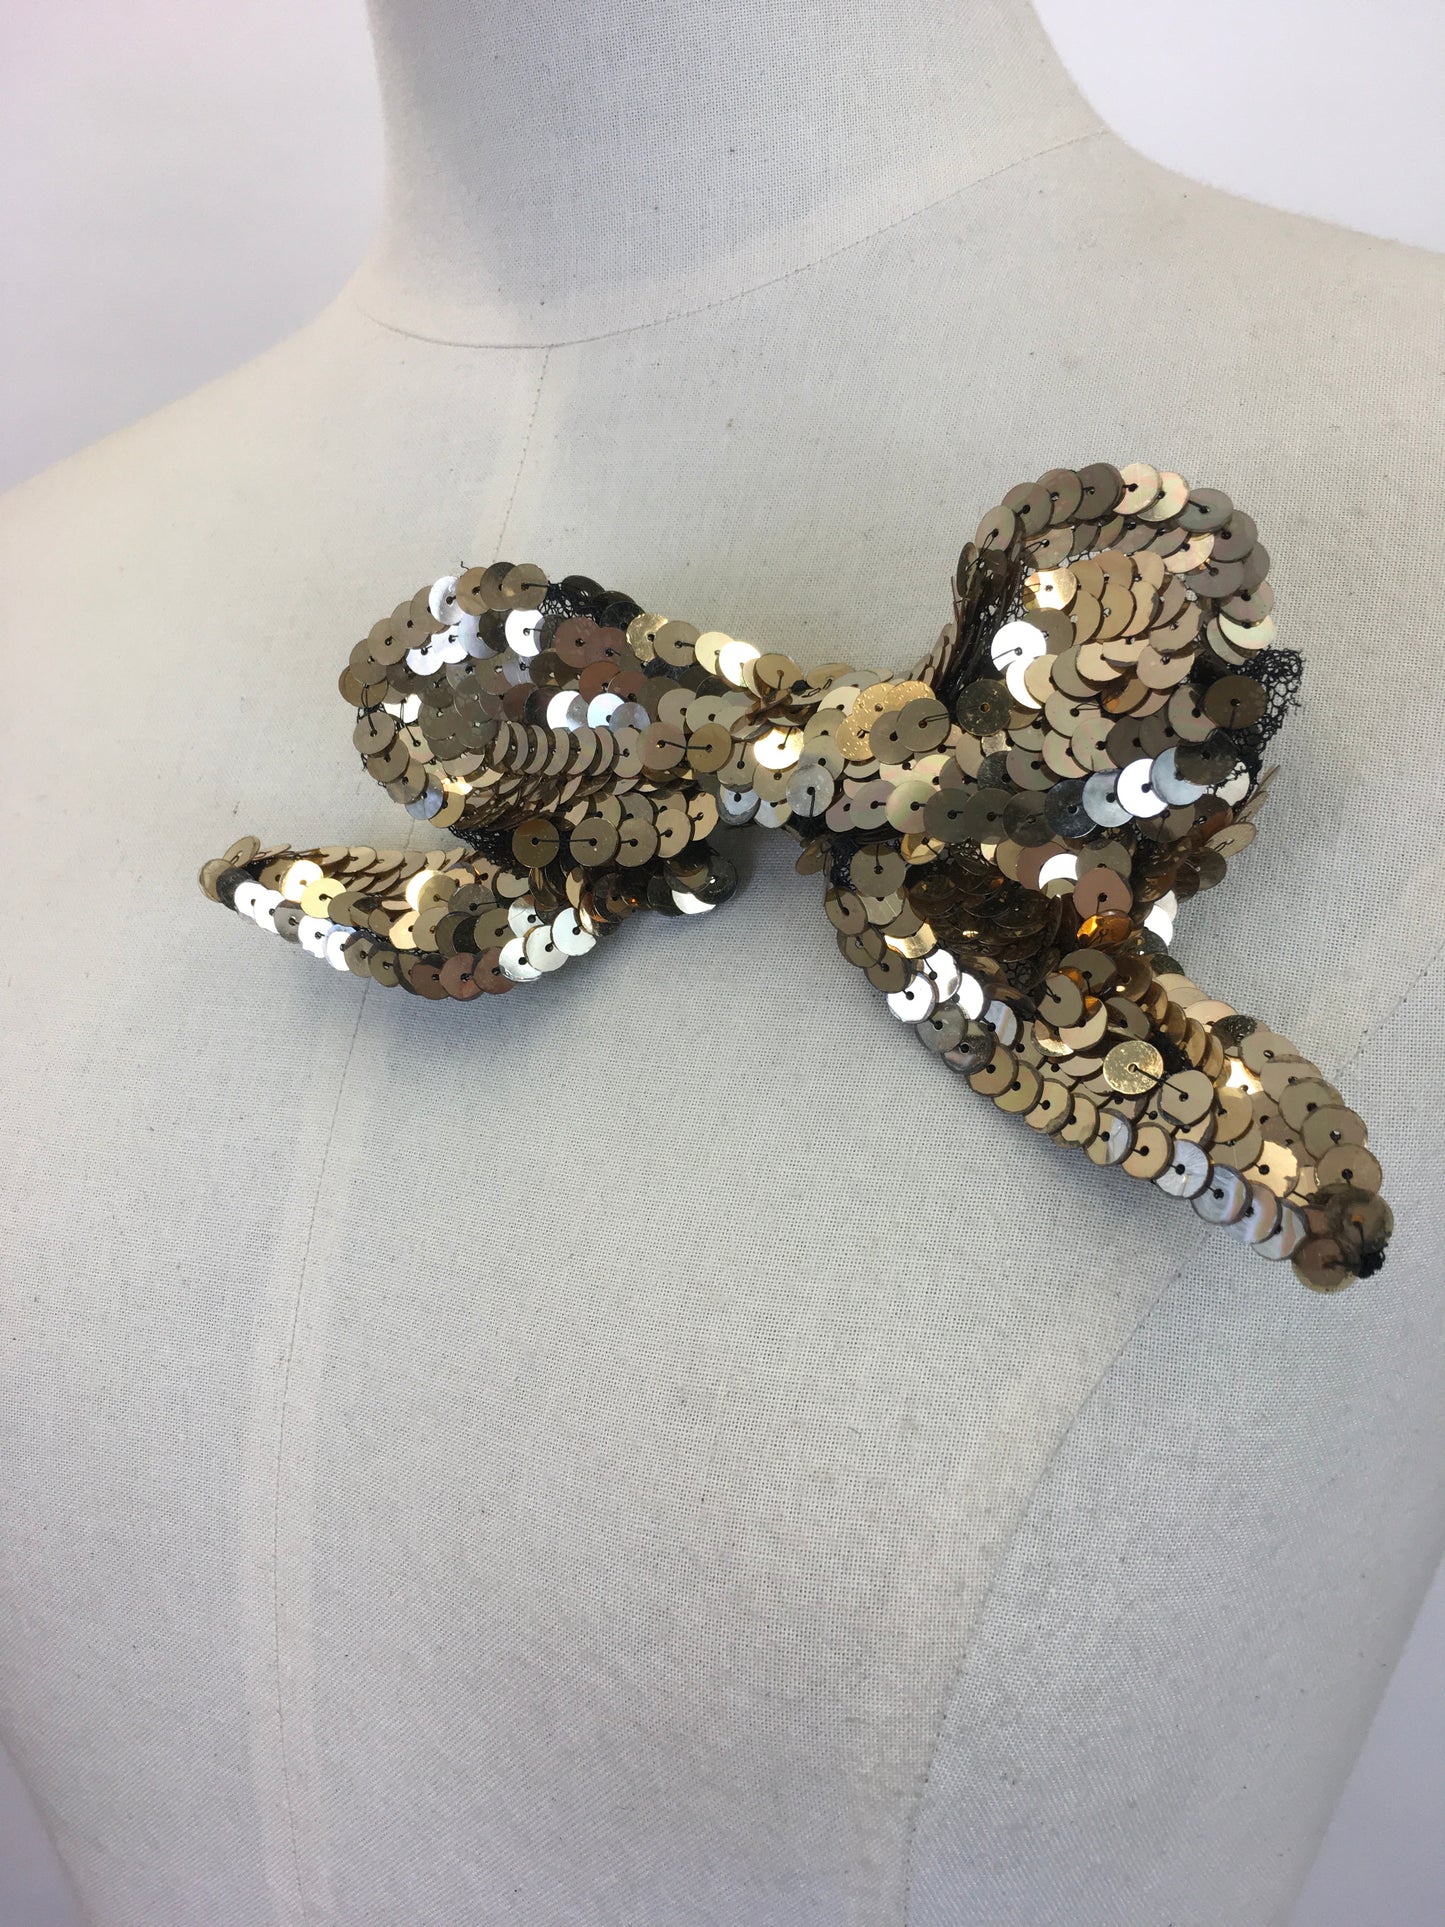 Original 1920's / 1930's Stunning Bow Adornment - In Shimmering Gold Sequins